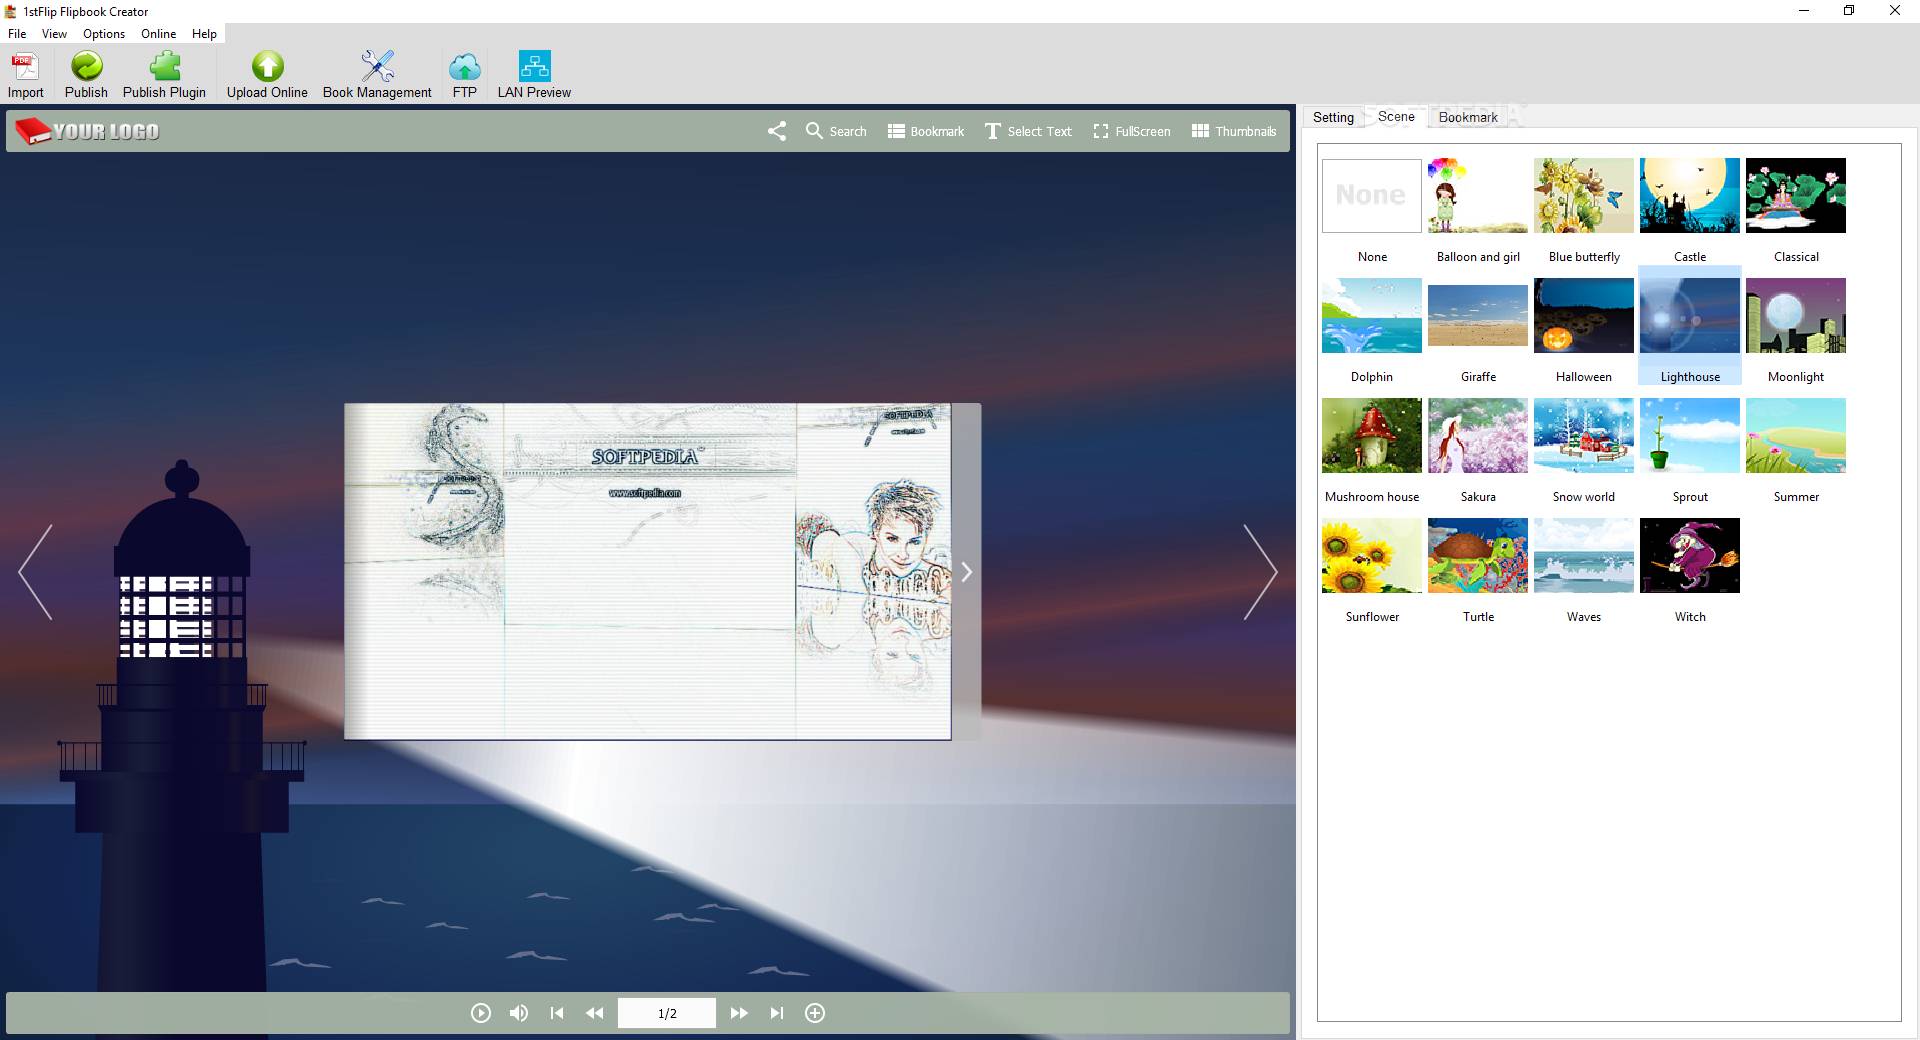 download the new version for android 1stFlip FlipBook Creator Pro 2.7.32